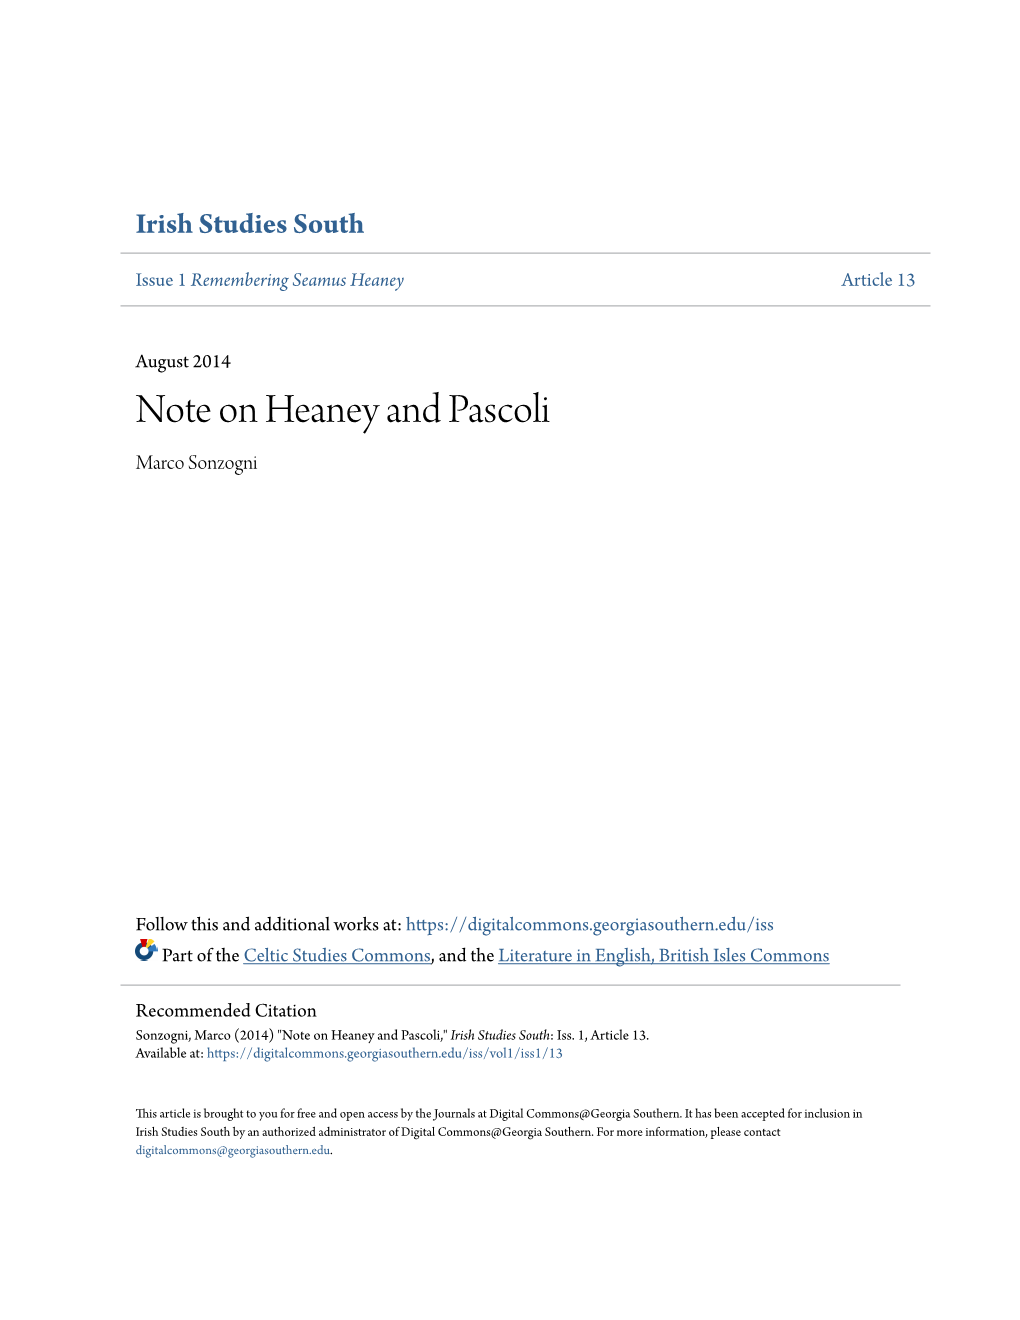 Note on Heaney and Pascoli Marco Sonzogni